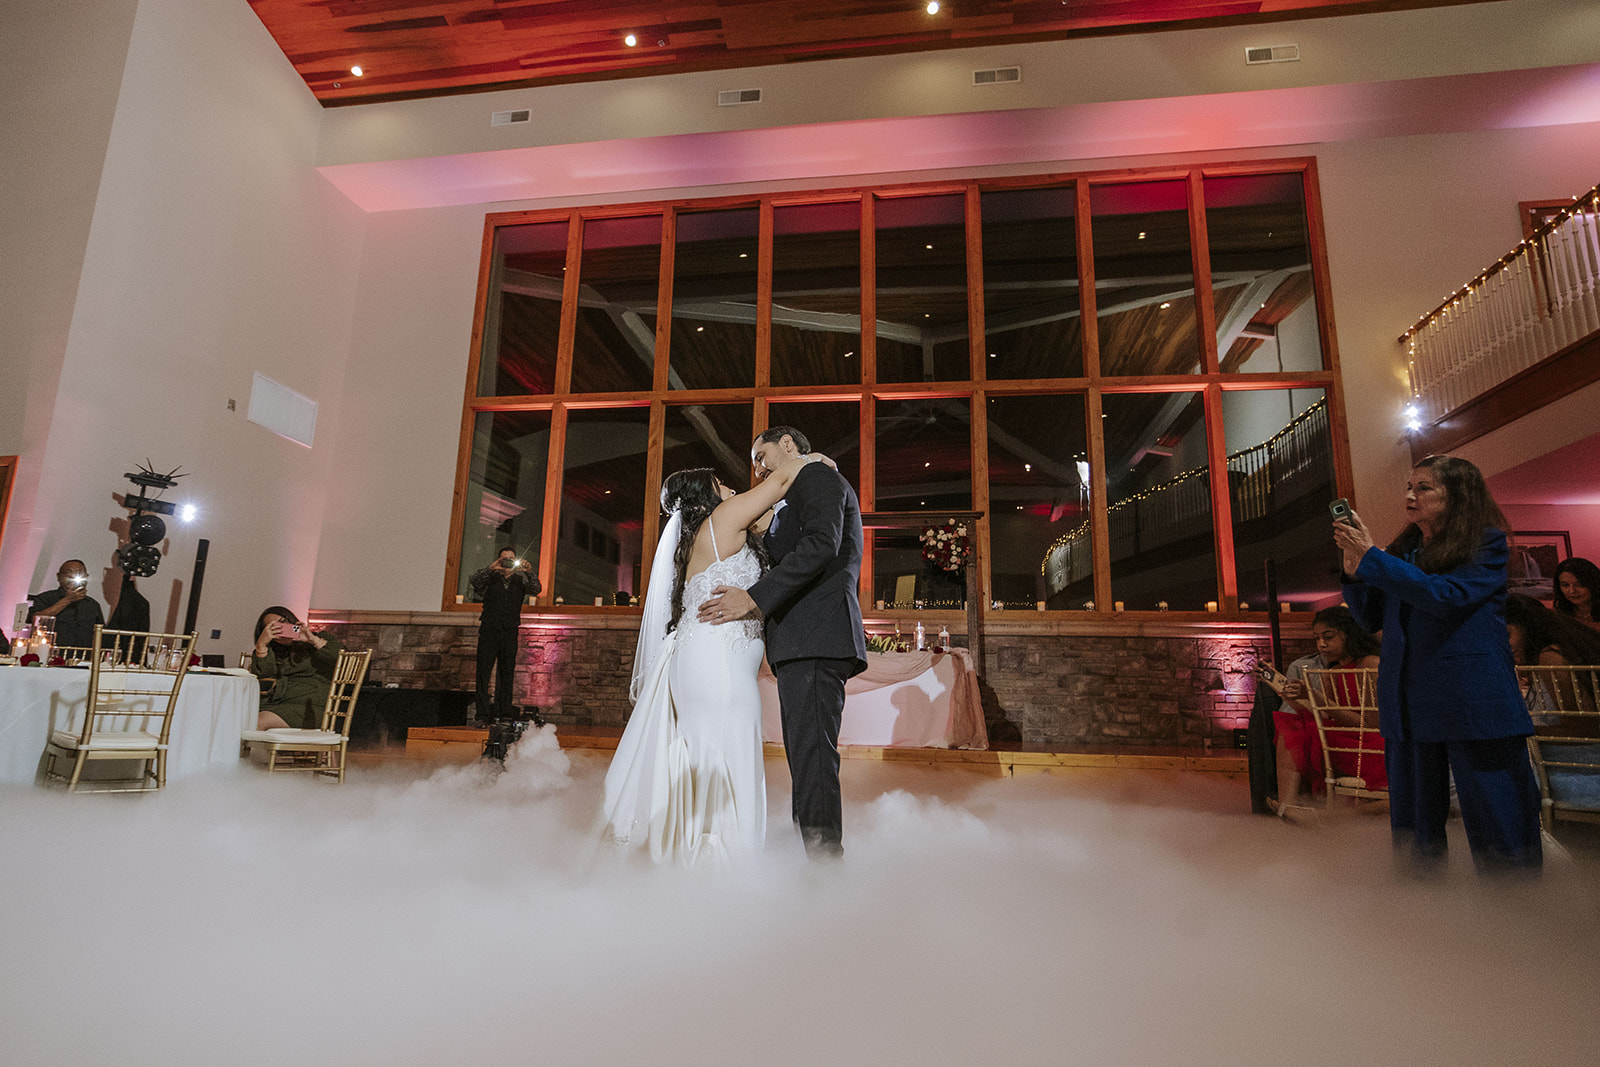 Bride and groom Dancing their first dance as husband and wife in a cloud of smoke.